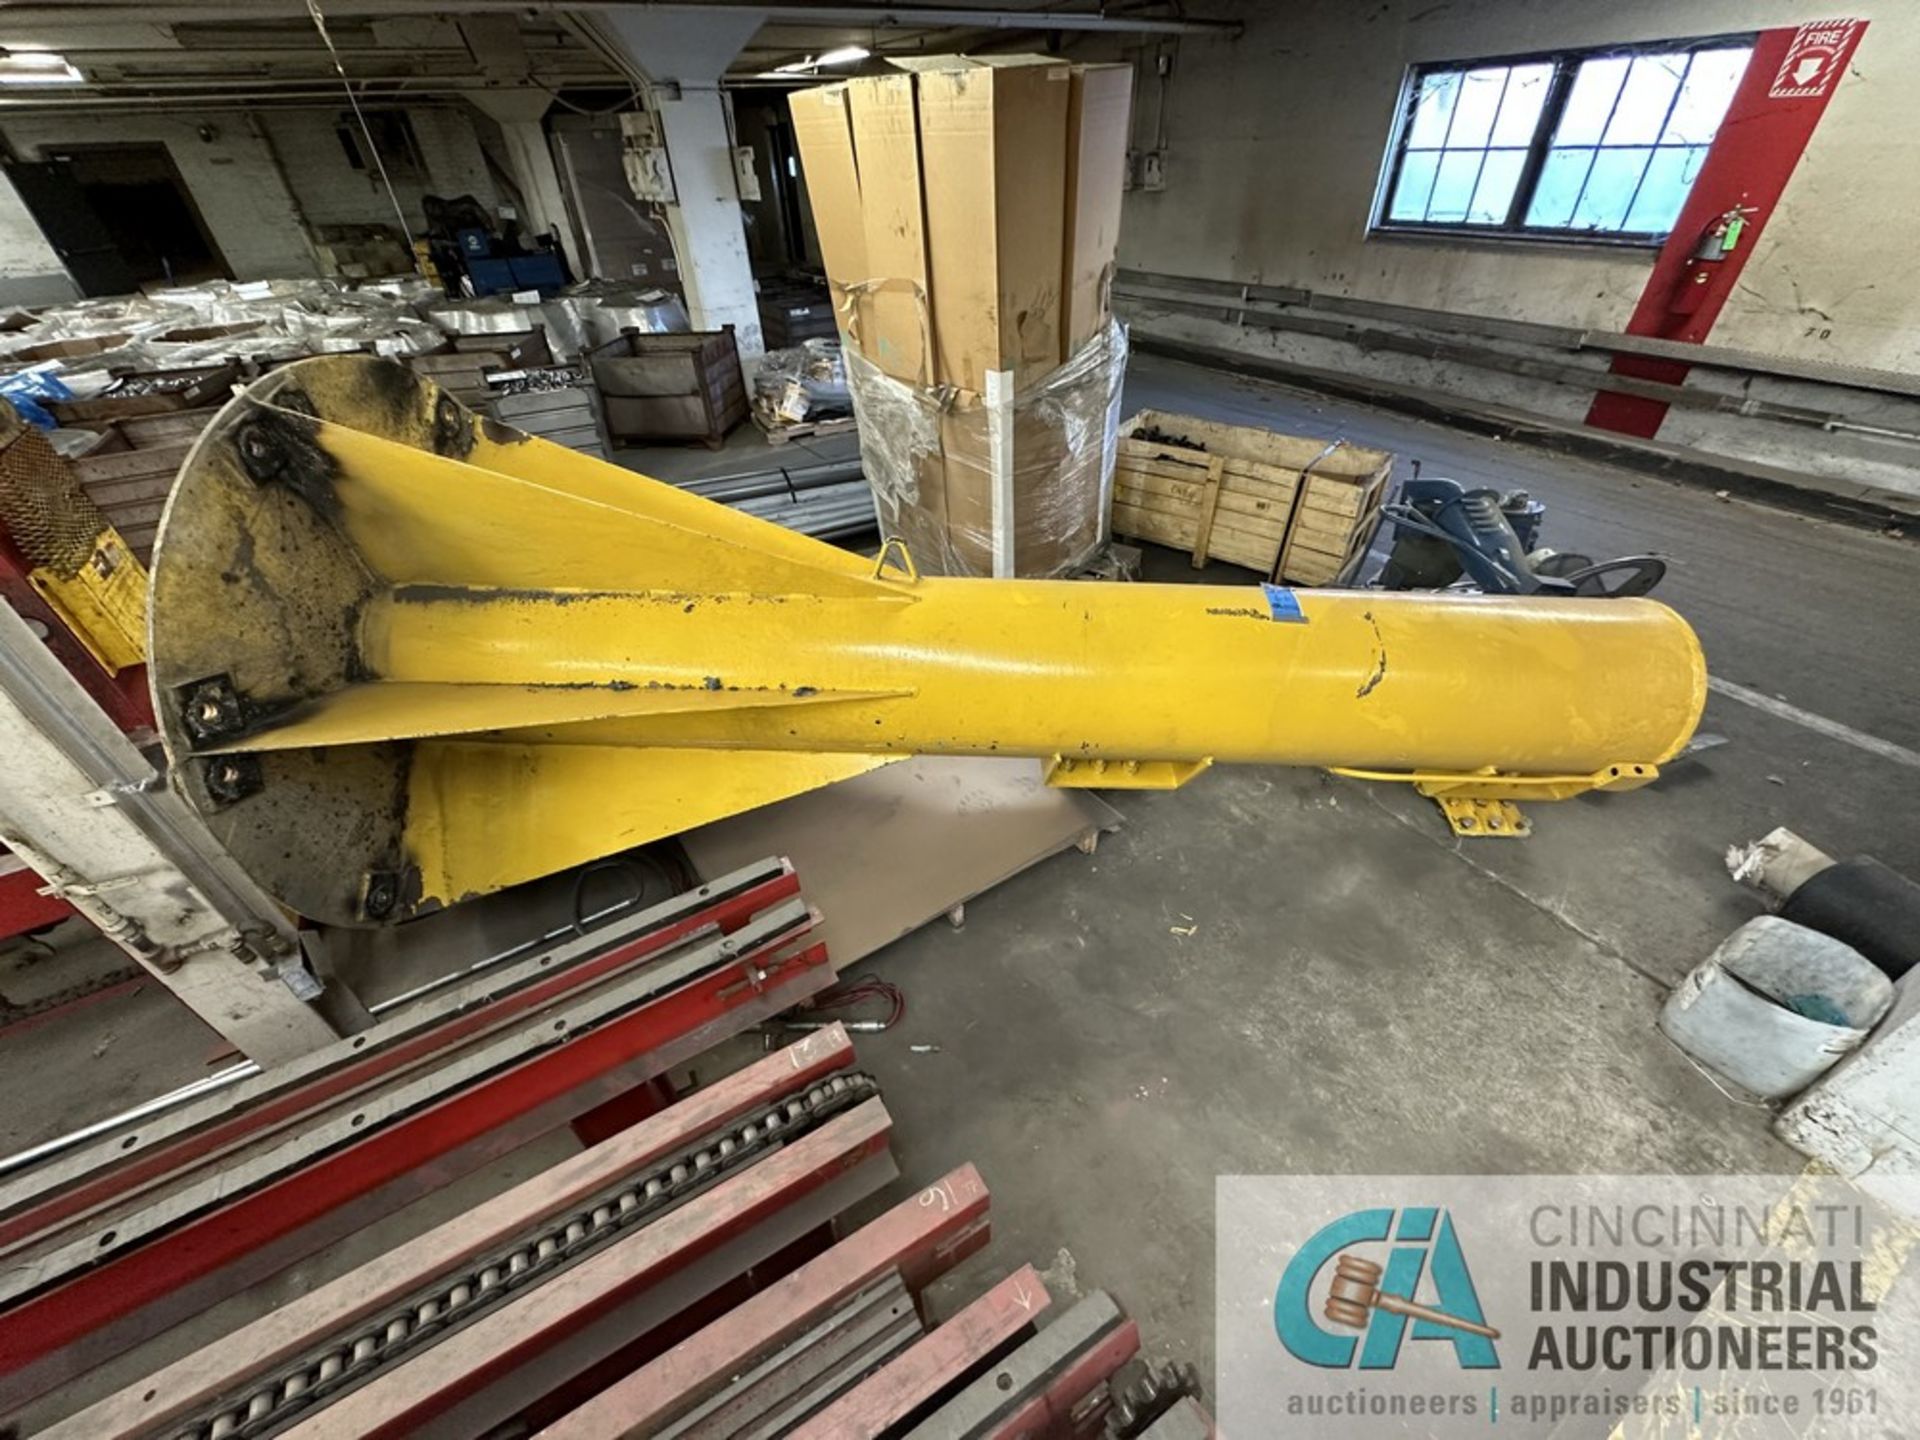 **** 1-TON ABELL-HOWE FLOOR MOUNTED JIB CRNAE; 11'5" COLUMN, 14'4" ARM, NO HOIST - Located at 4107